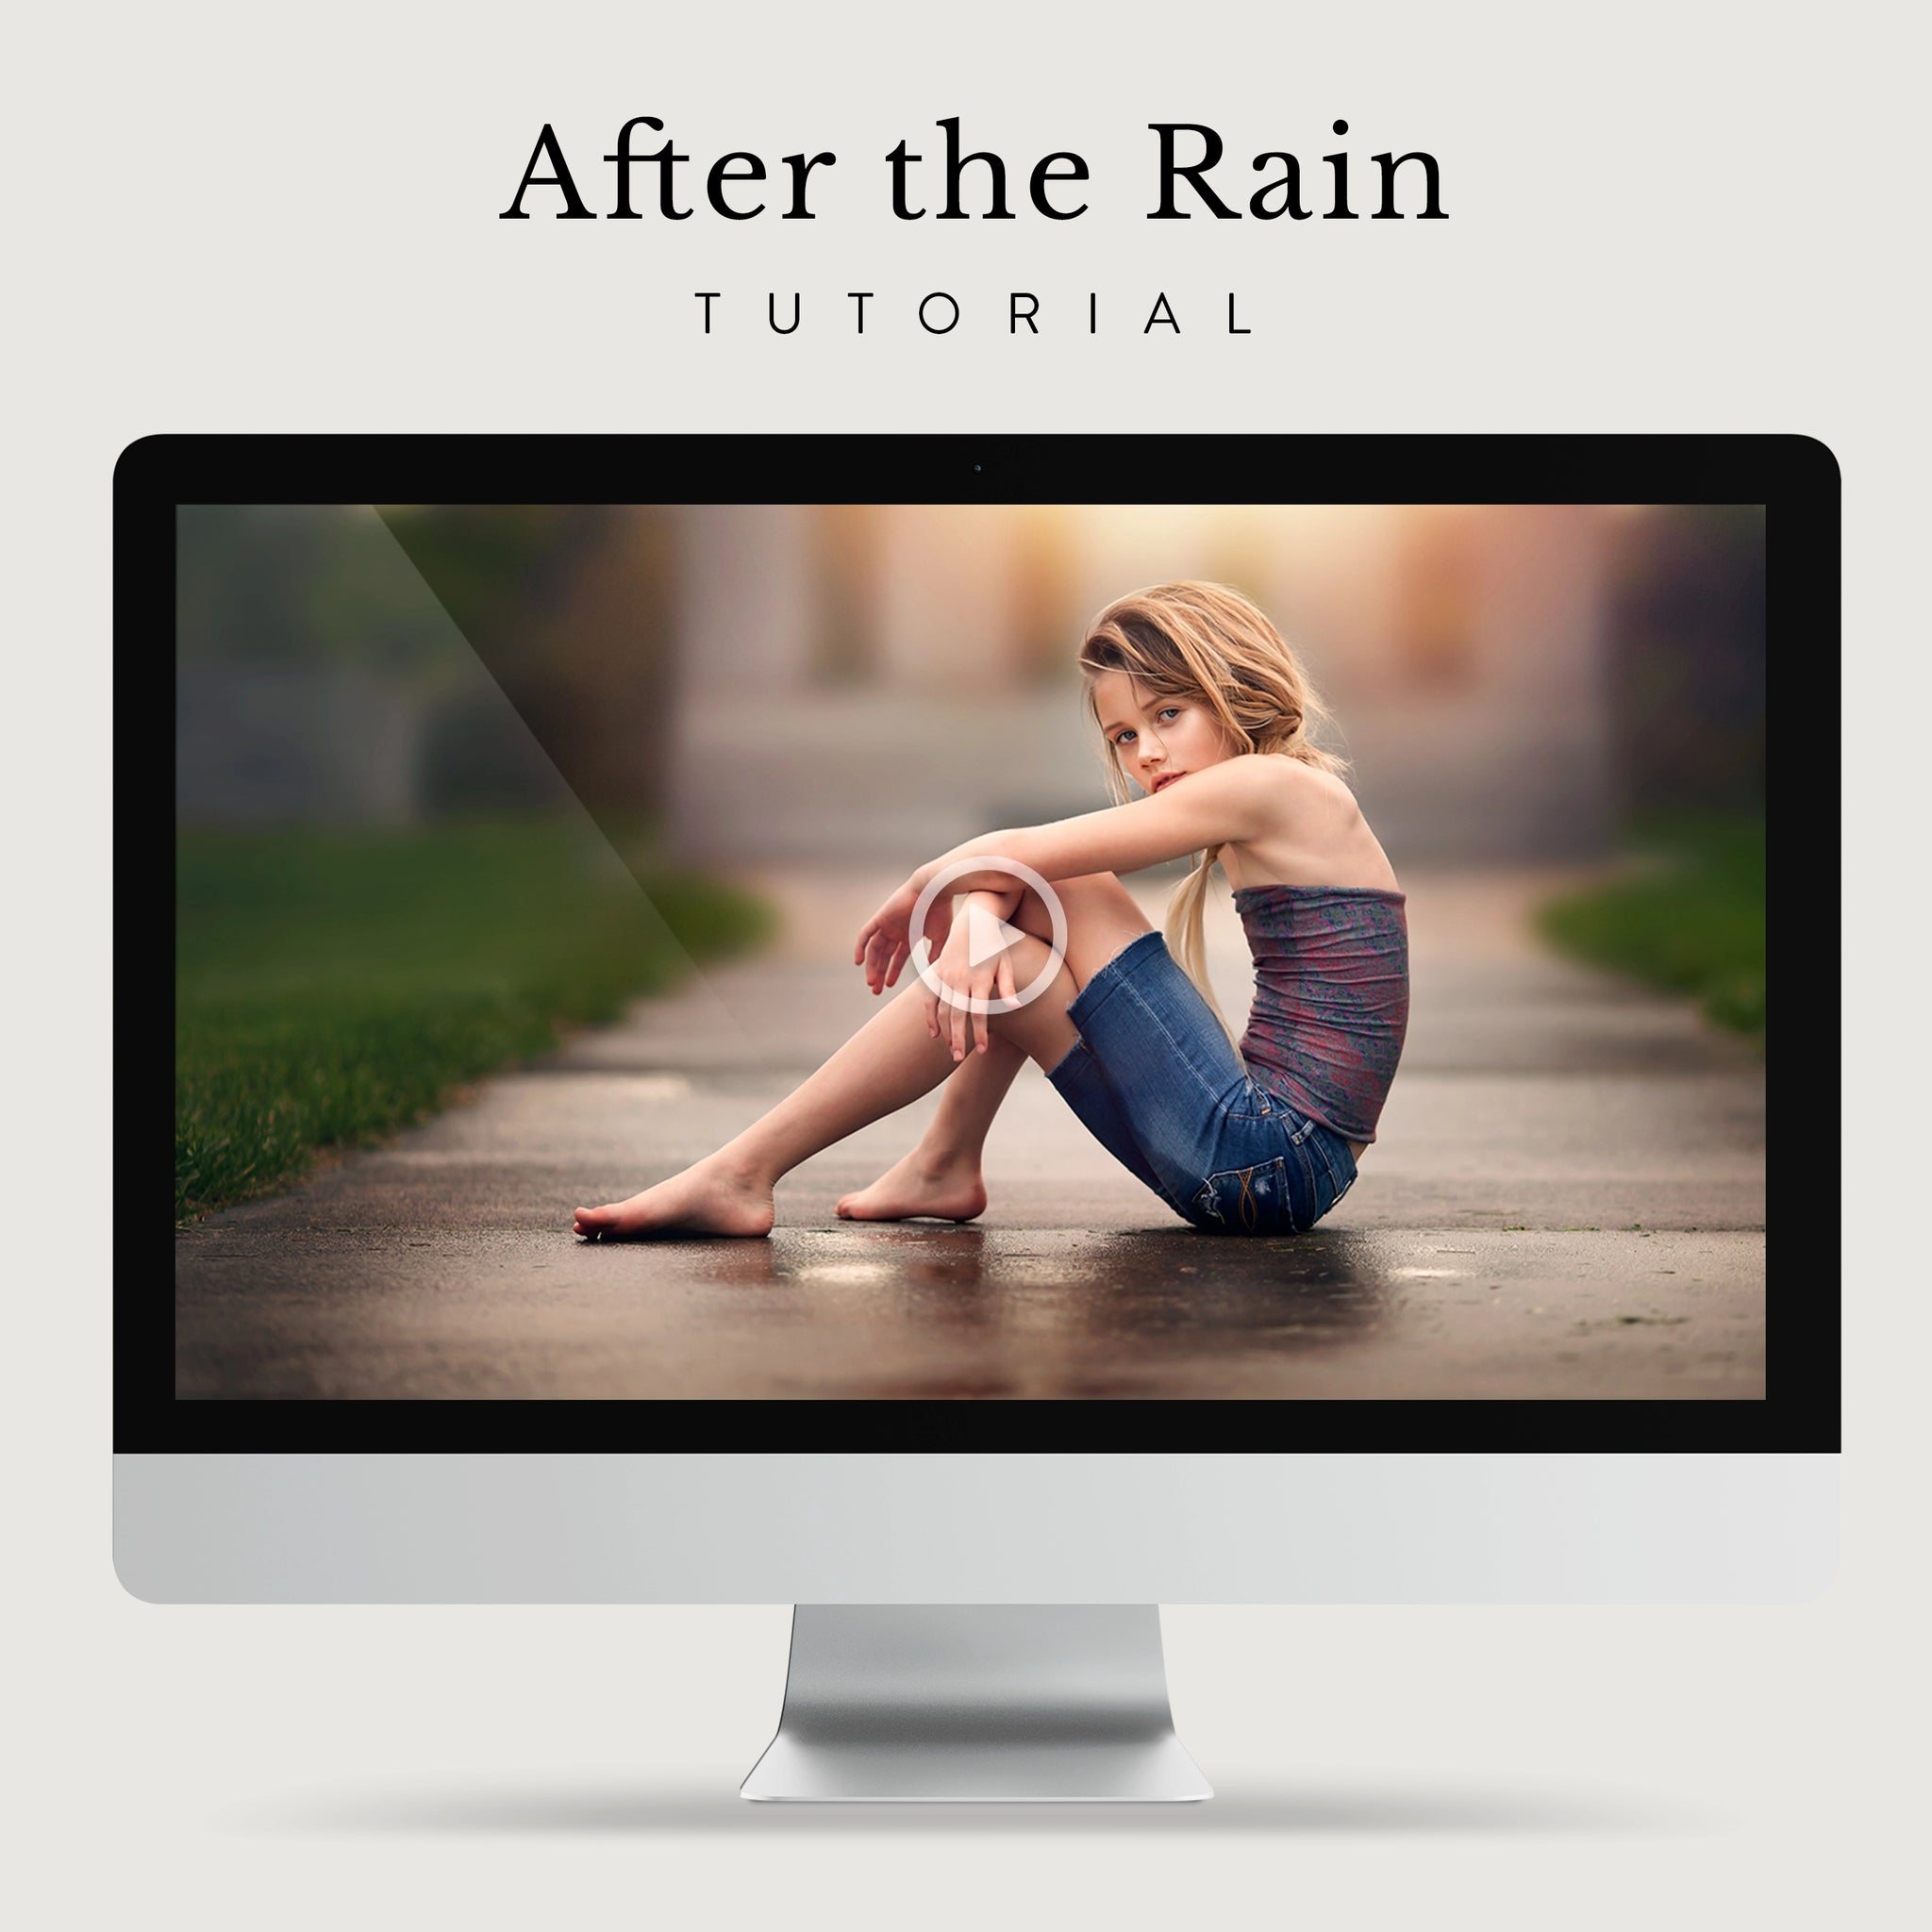 After the Rain Tutorial